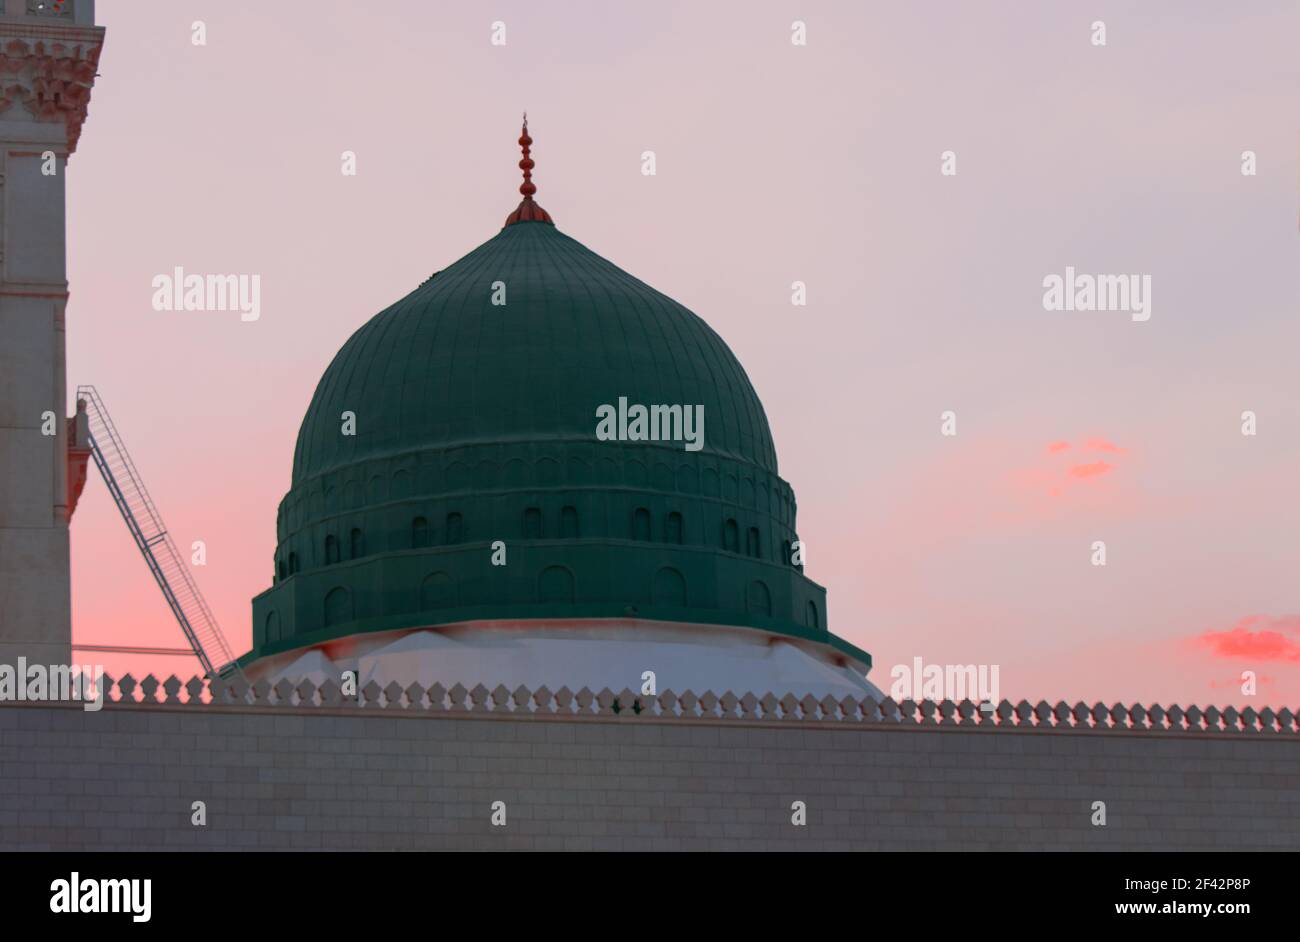 Al-Masjid An-Nabawi - The Prophet Mosque. Iftar time for Ramadan. Sunset at Medina. The famous Green Dome Stock Photo Alamy